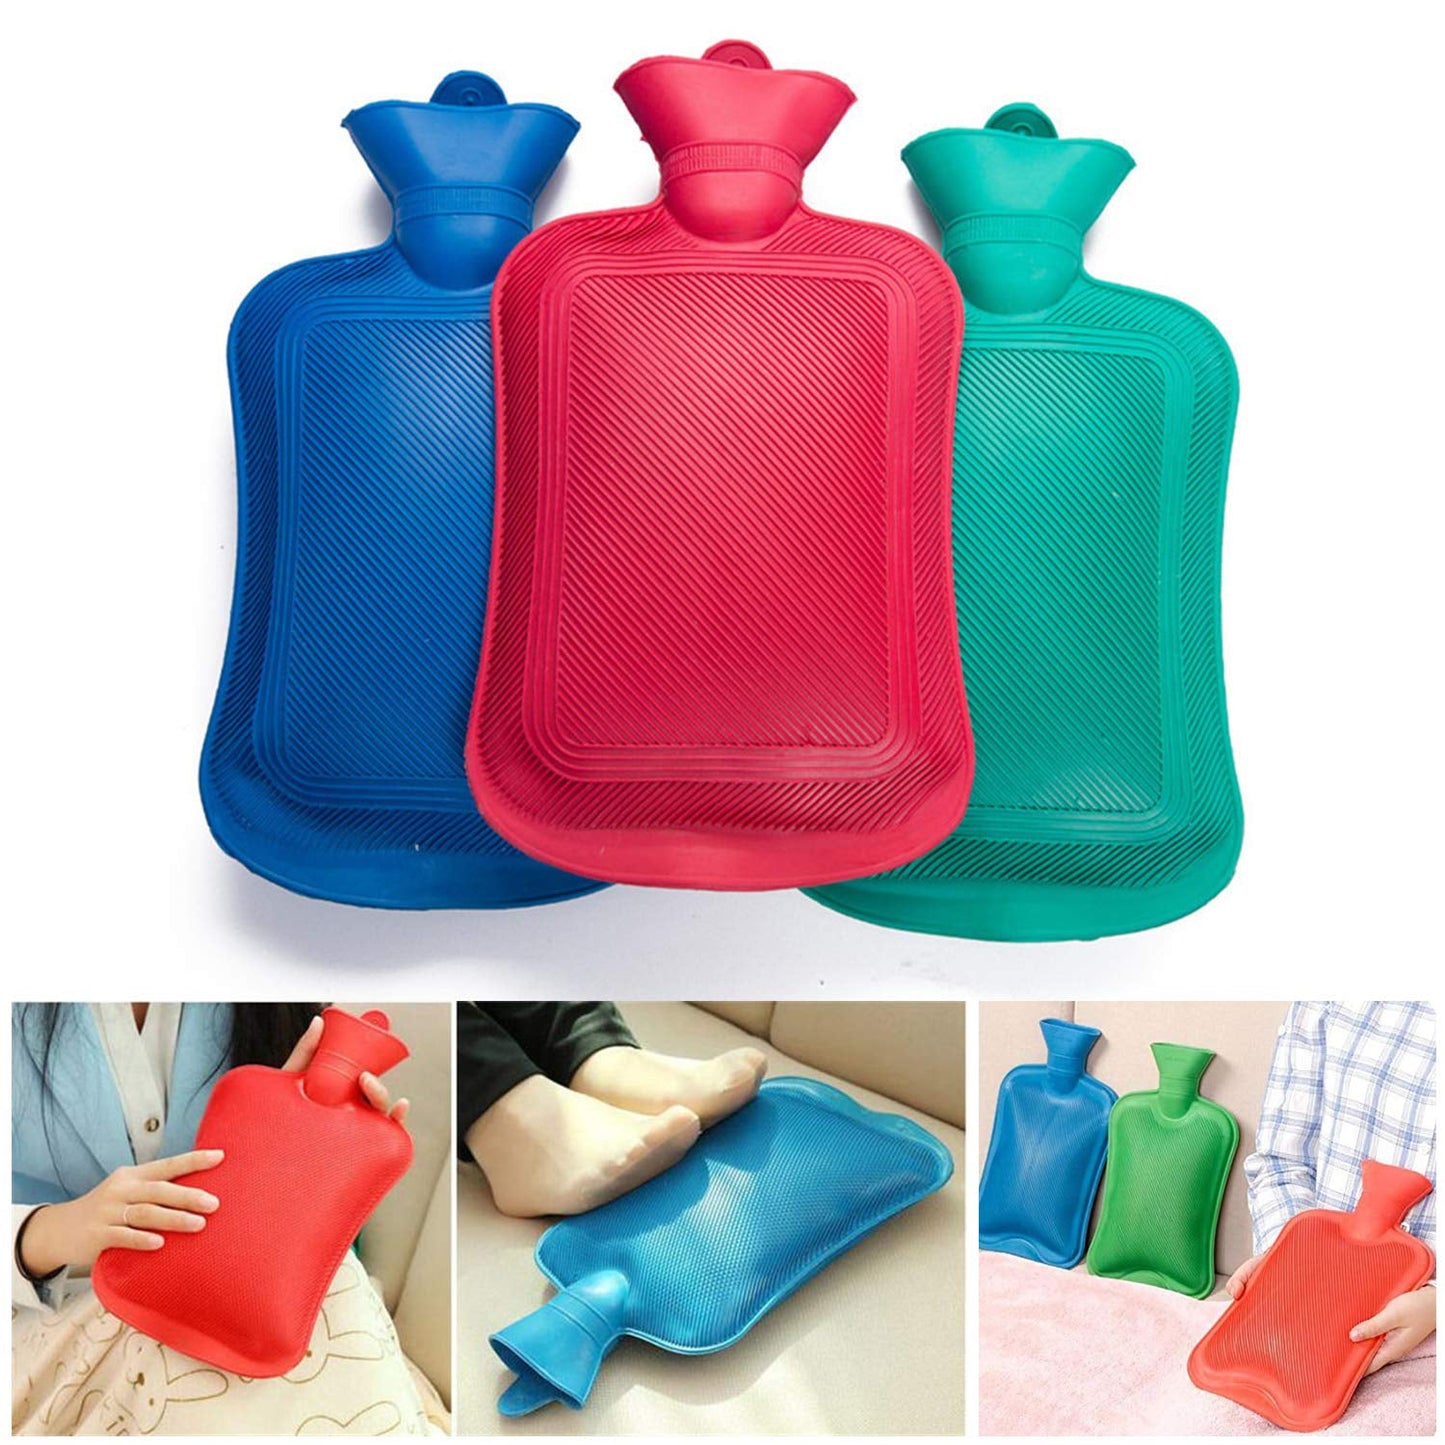 394 (Medium) Rubber Hot Water Heating Pad Bag for Pain Relief Dukandaily